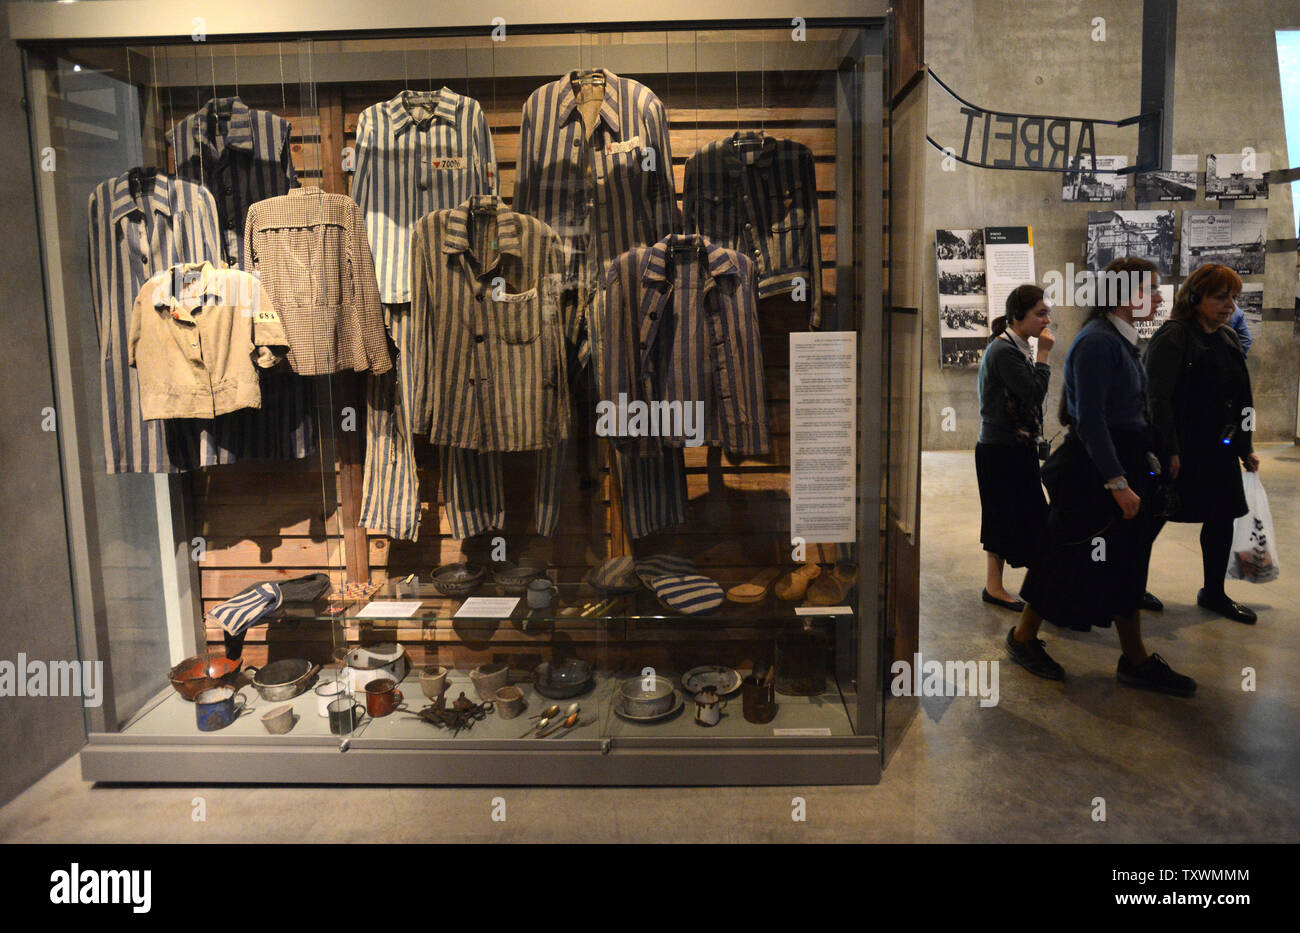 Visitors walk by a display of concentration camp uniforms worn by Jews during the reign of Nazi Germany in War World II, which resulted in the mass murder of six million Jews, in the Yad Vashem Holocaust Museum in Jerusalem, Israel, January 25, 2015. International Holocaust Day will be marked on January 27, the date in 1945 when the Auschwitz-Birkenau concentration camp was liberated by Soviet forces. Photo by Debbie Hill/UPI Stock Photo